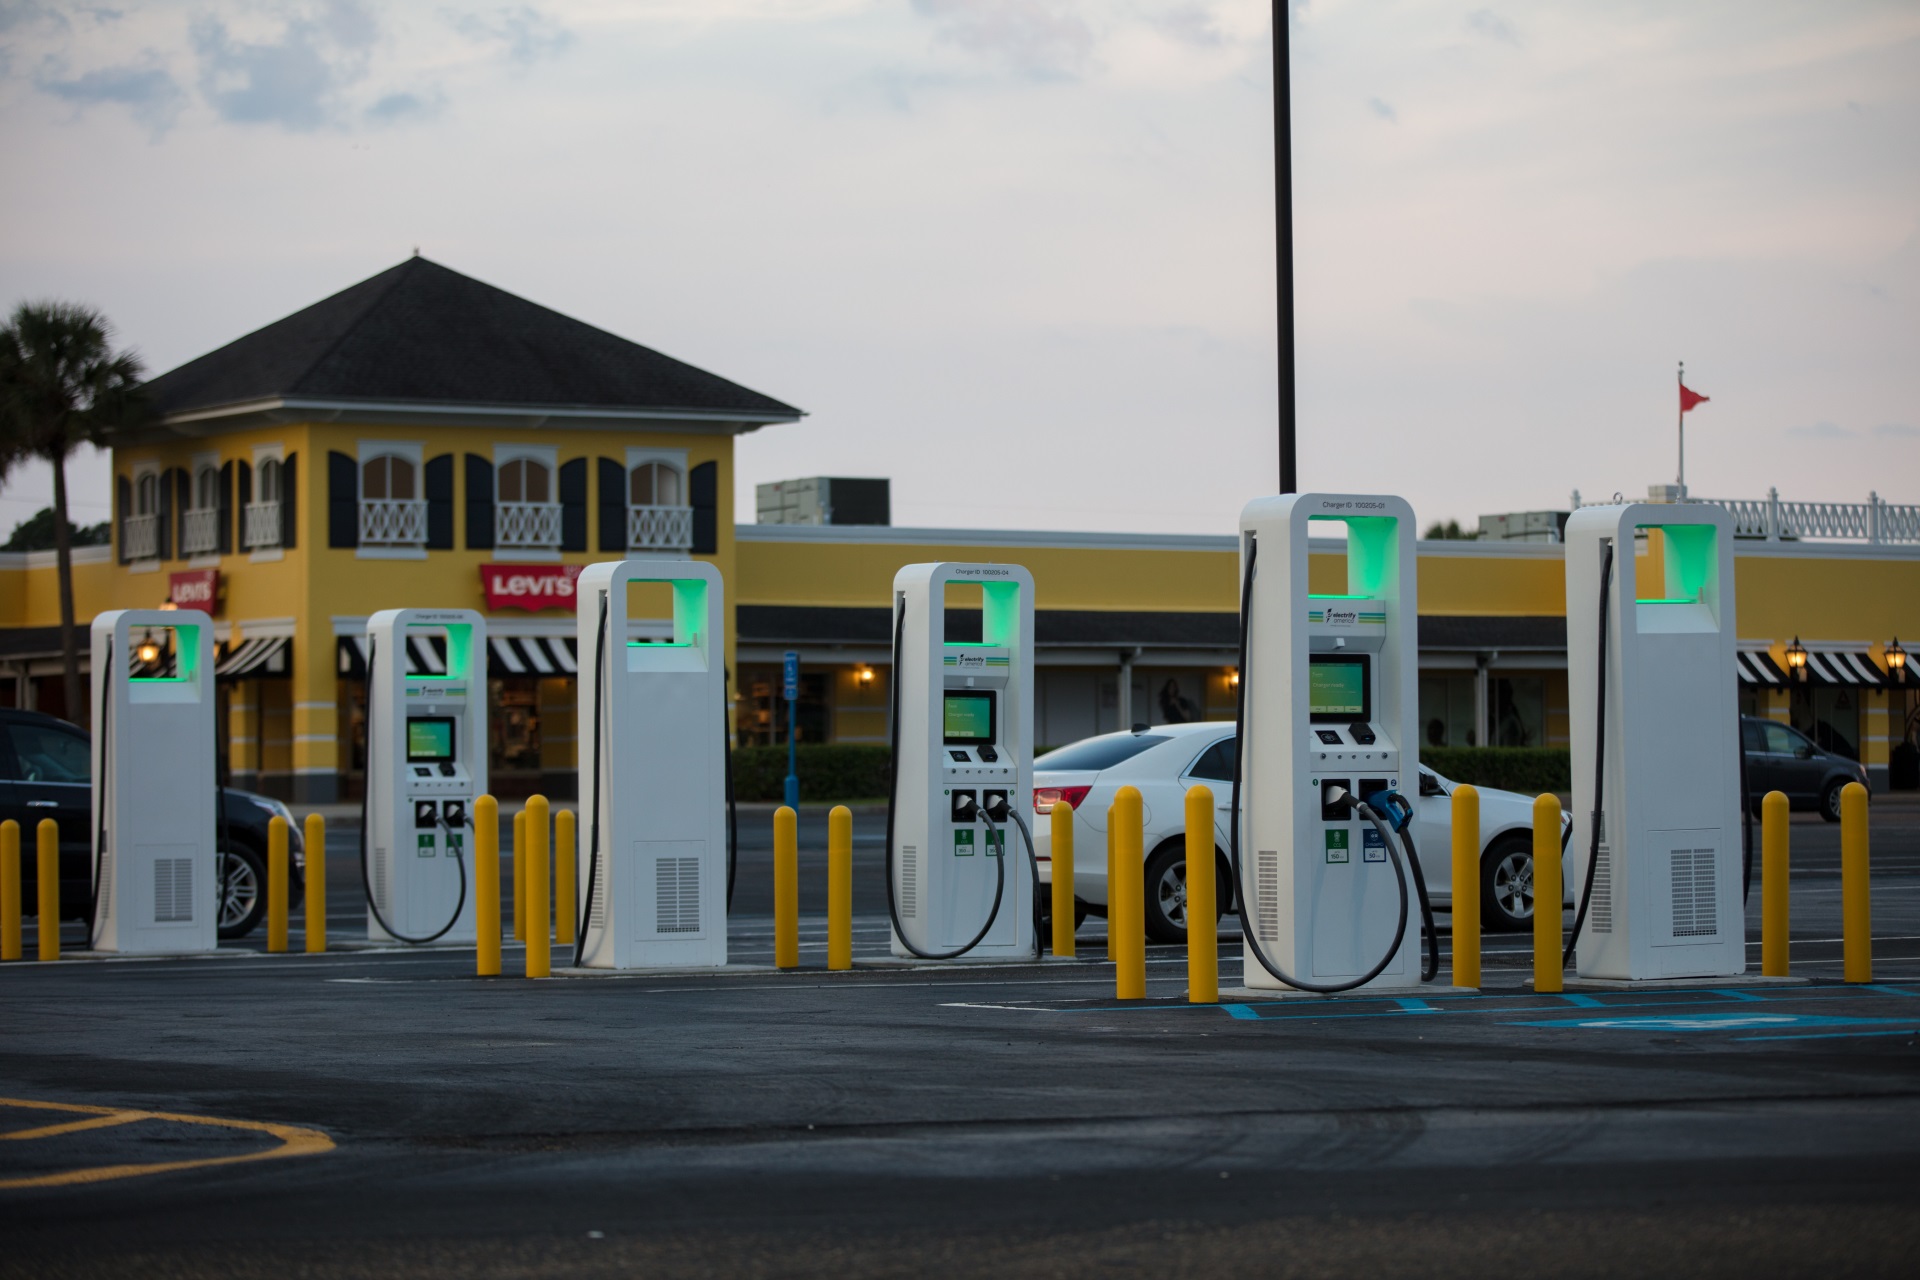 electrify-america-dc-fast-chargers-in-gulfport-mississippi_100673827_h.jpg